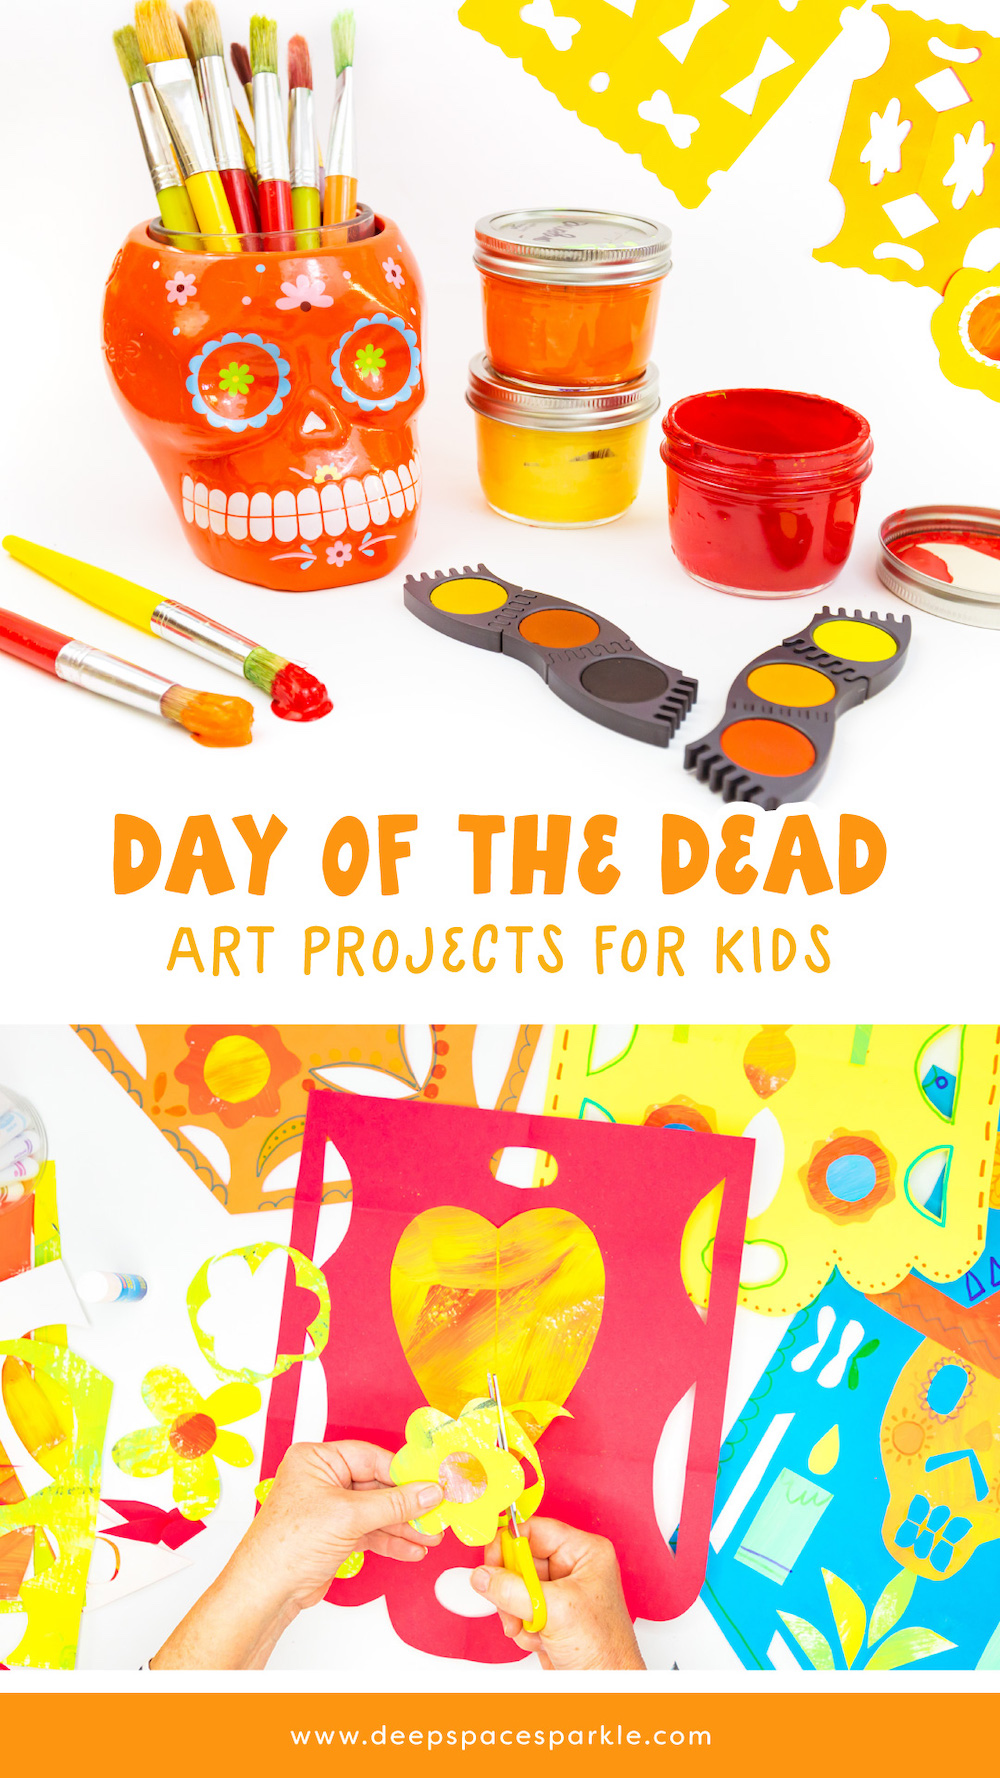 Day of the Dead project art lesson roundup for art teachers and students